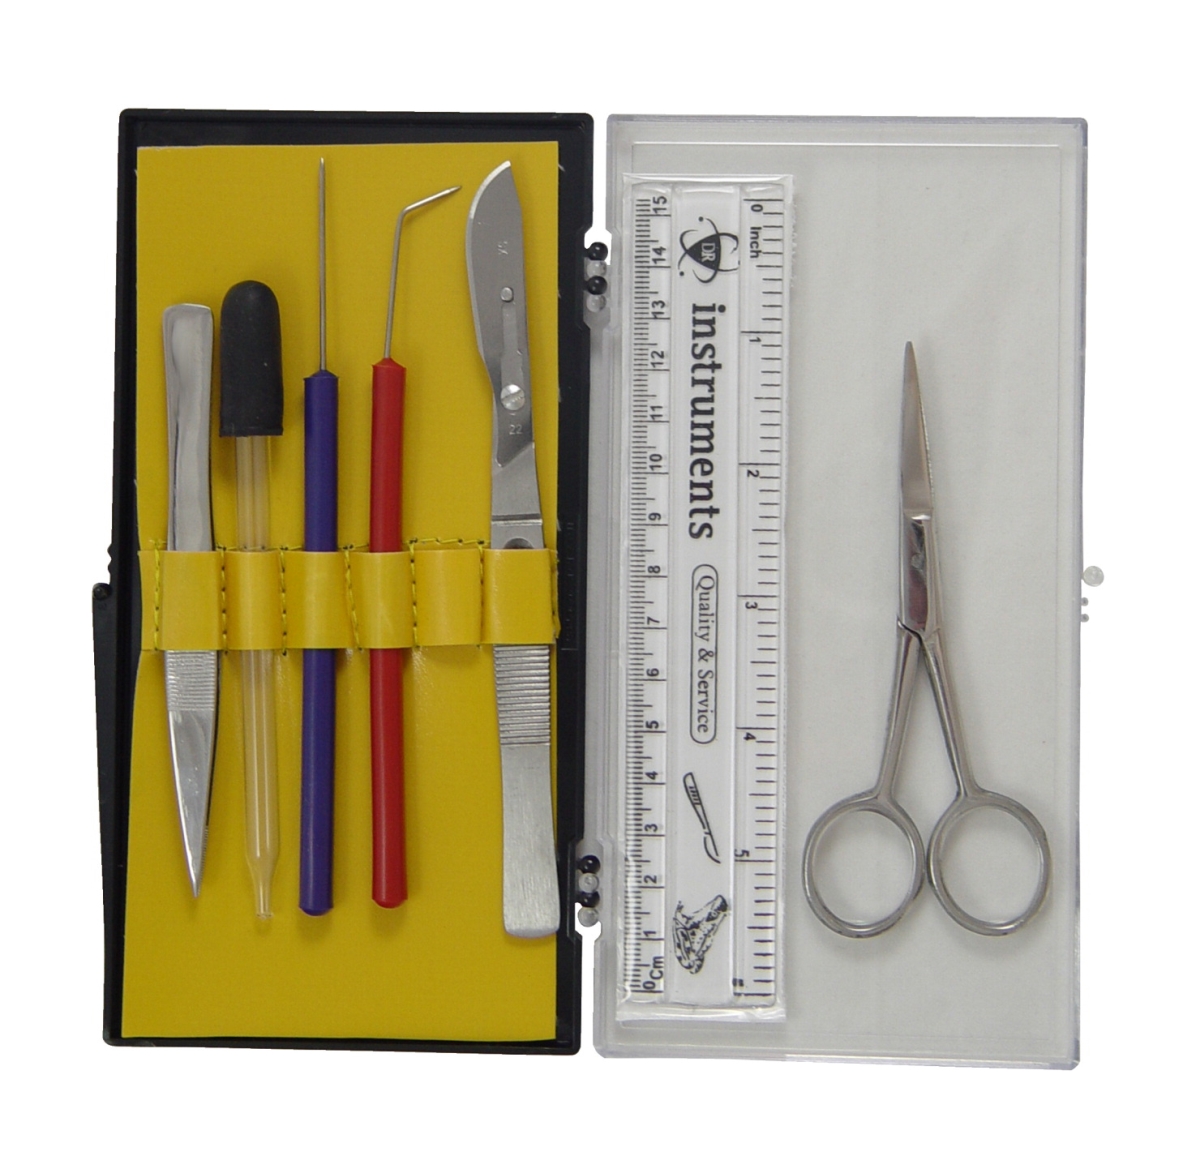 Picture of DR Instruments 576867 Frey Scientific 61 Series Student Dissection Kit with Replaceable Blade Scalpel - Plastic Case